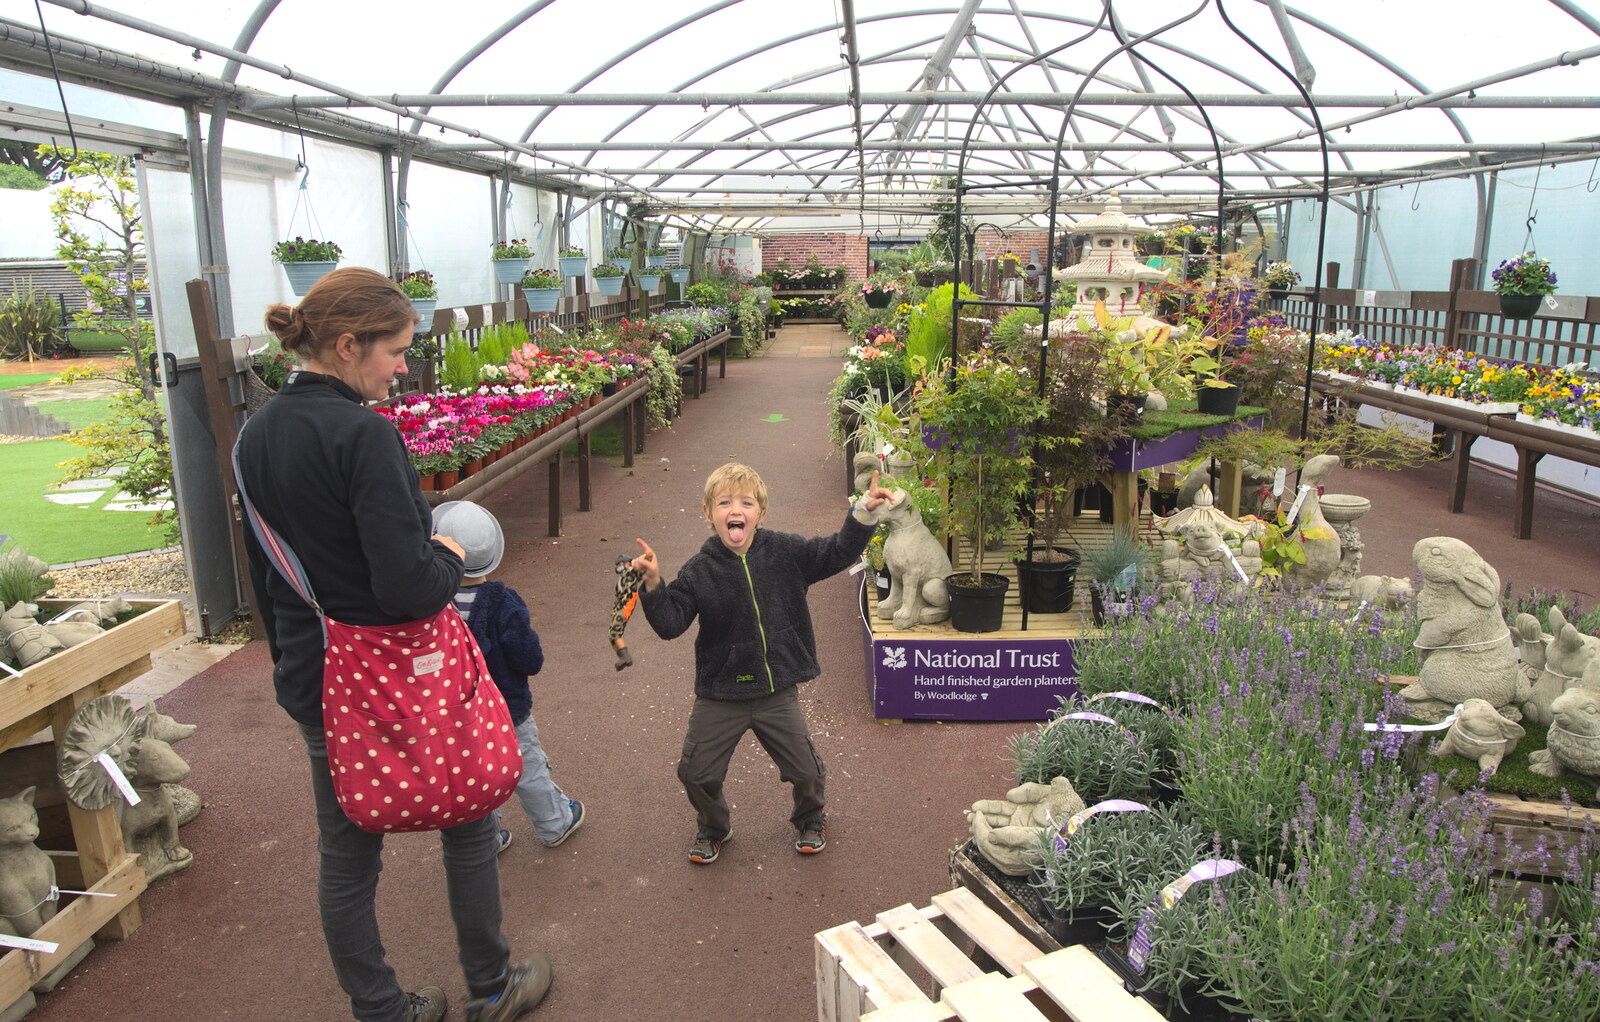 Fred goes nuts in the garden centre from Camping at Roundhills, Brockenhurst, New Forest, Hampshire - 29th August 2015